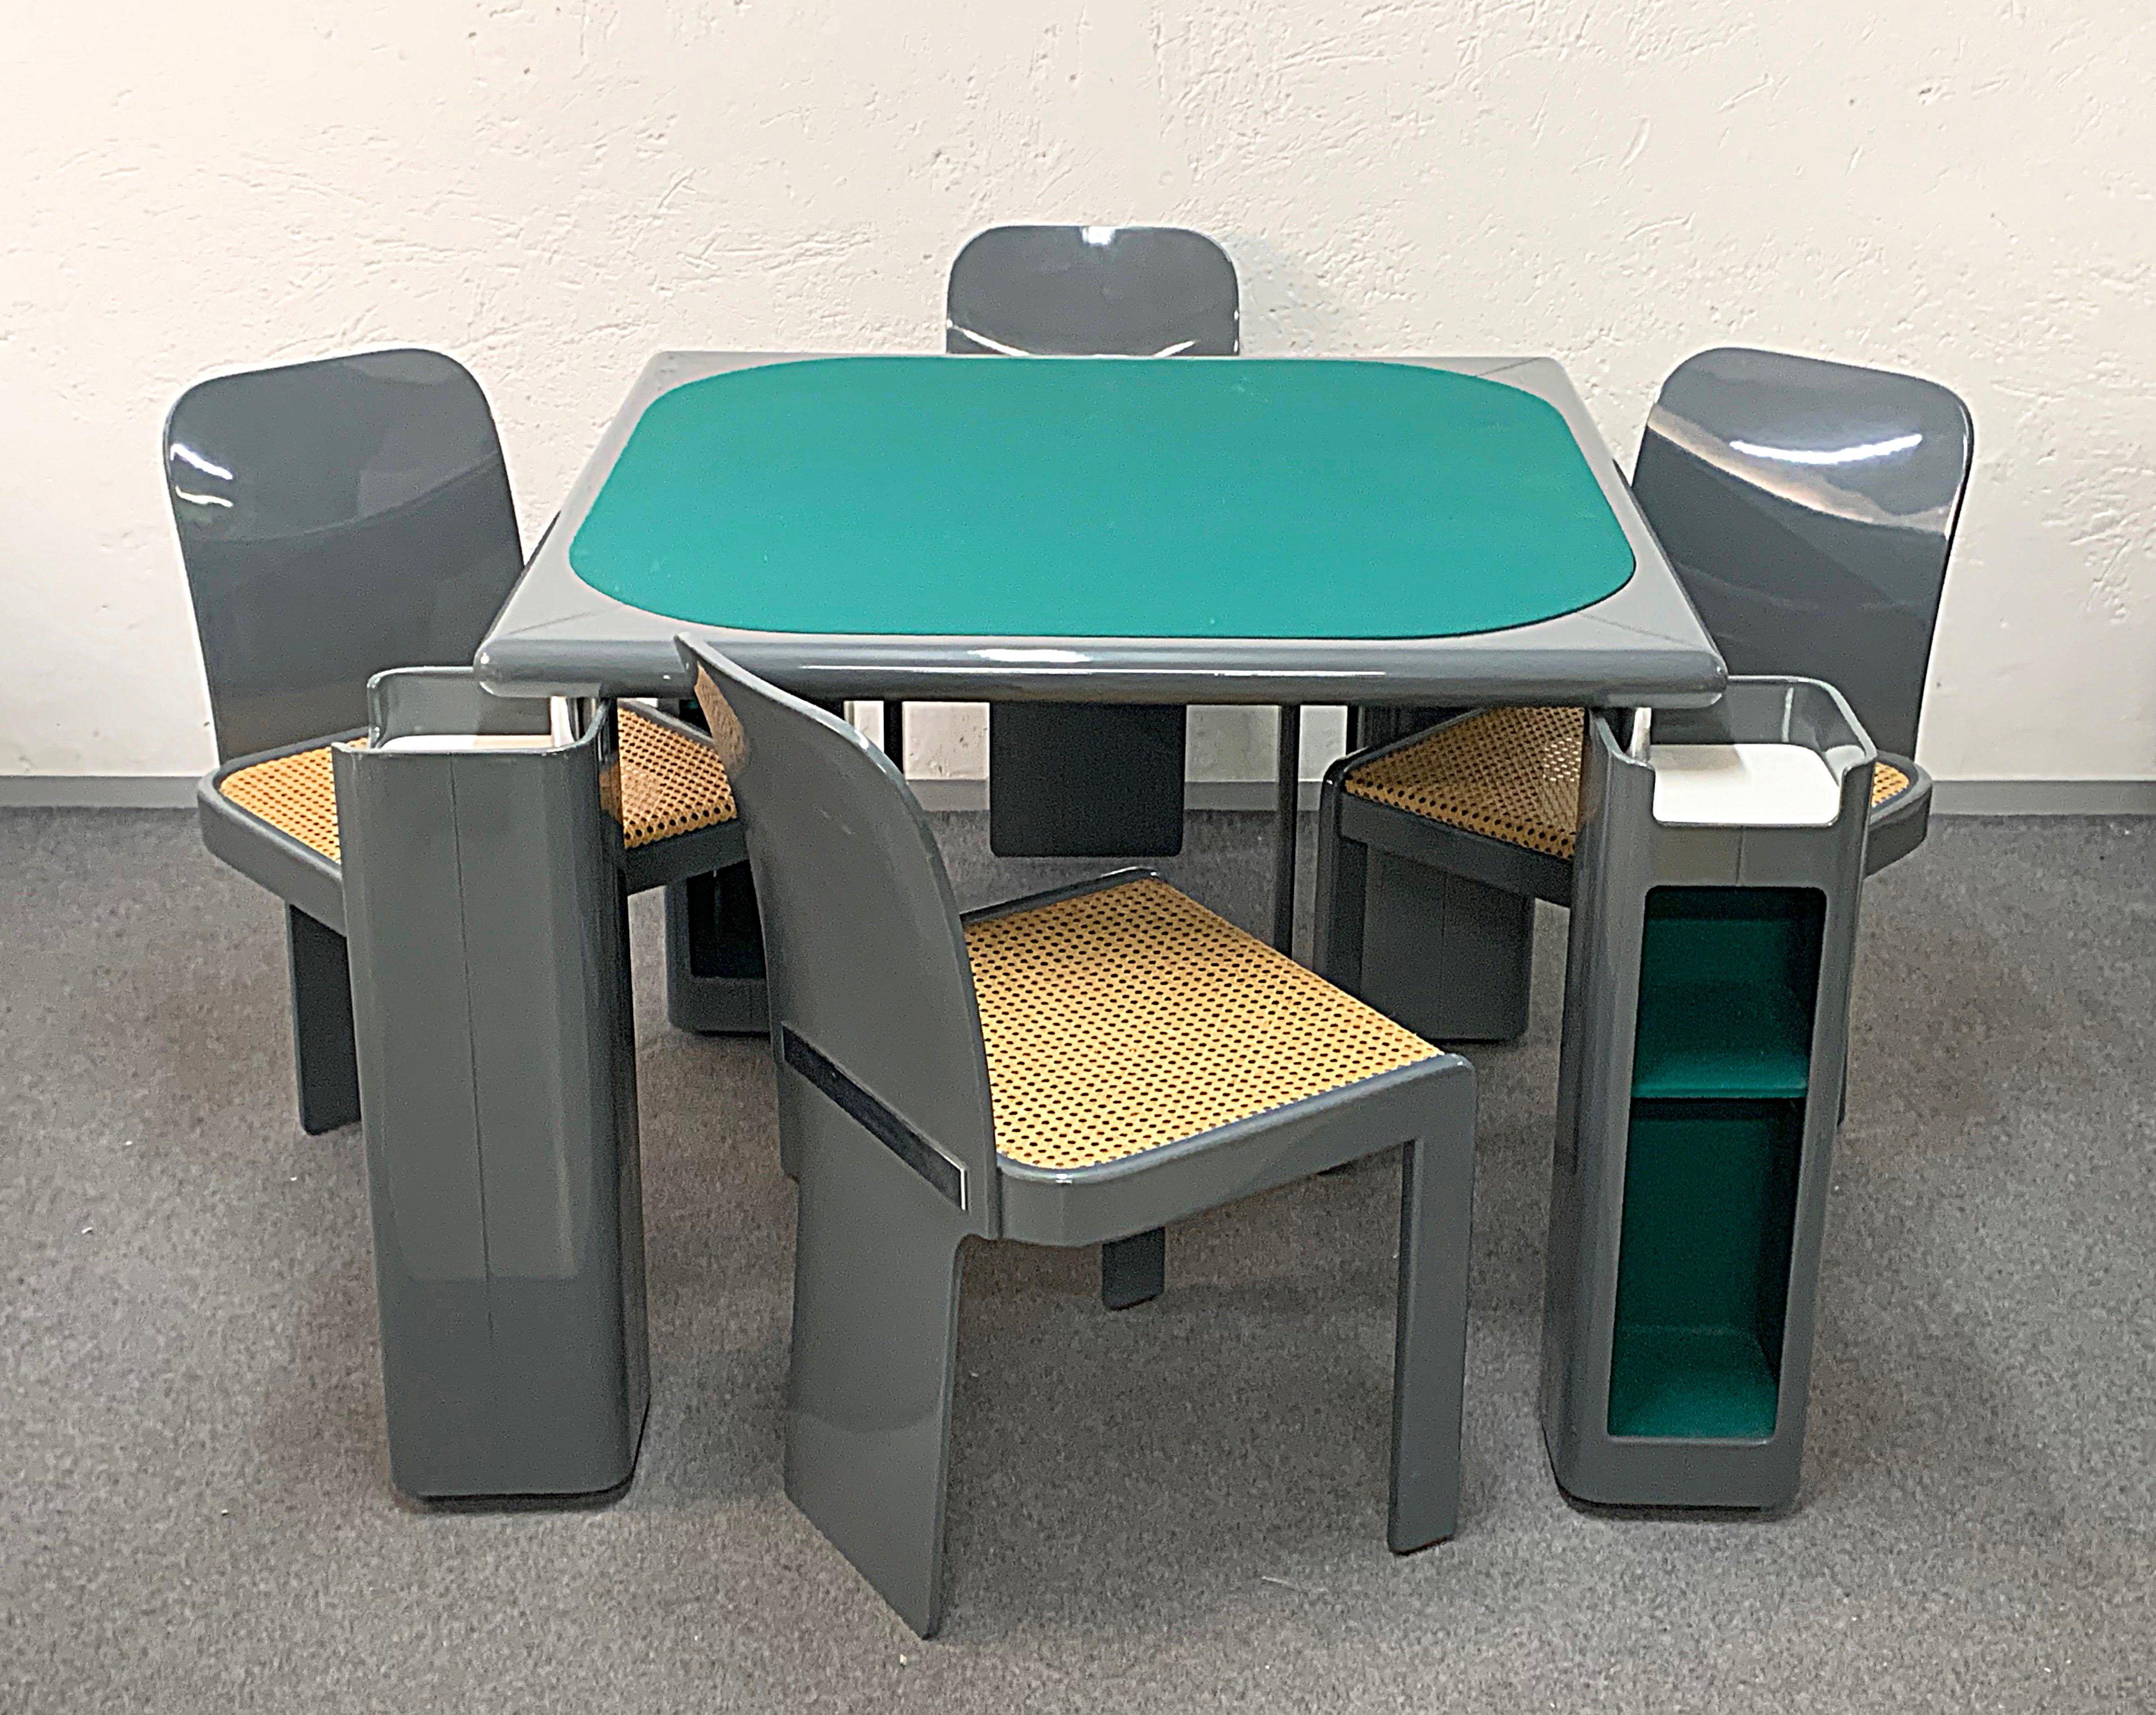 Wonderful midcentury complete set including a game table and four chairs designed in Italy during the 1970s by Pierluigi Molinari for Pozzi Milano.

The table has a top in original green felt and its main structure is in glossy gray lacquered